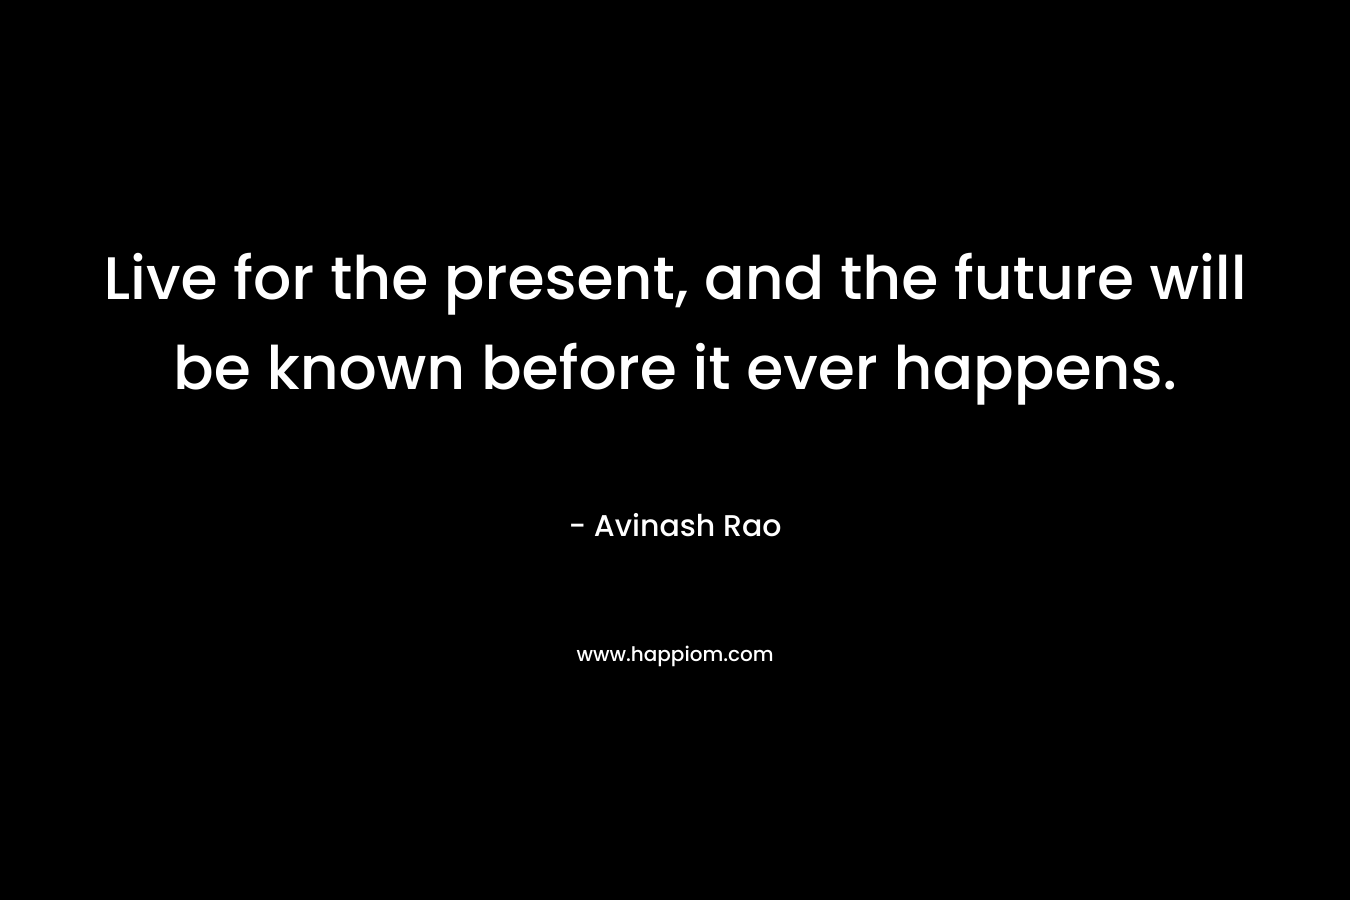 Live for the present, and the future will be known before it ever happens.